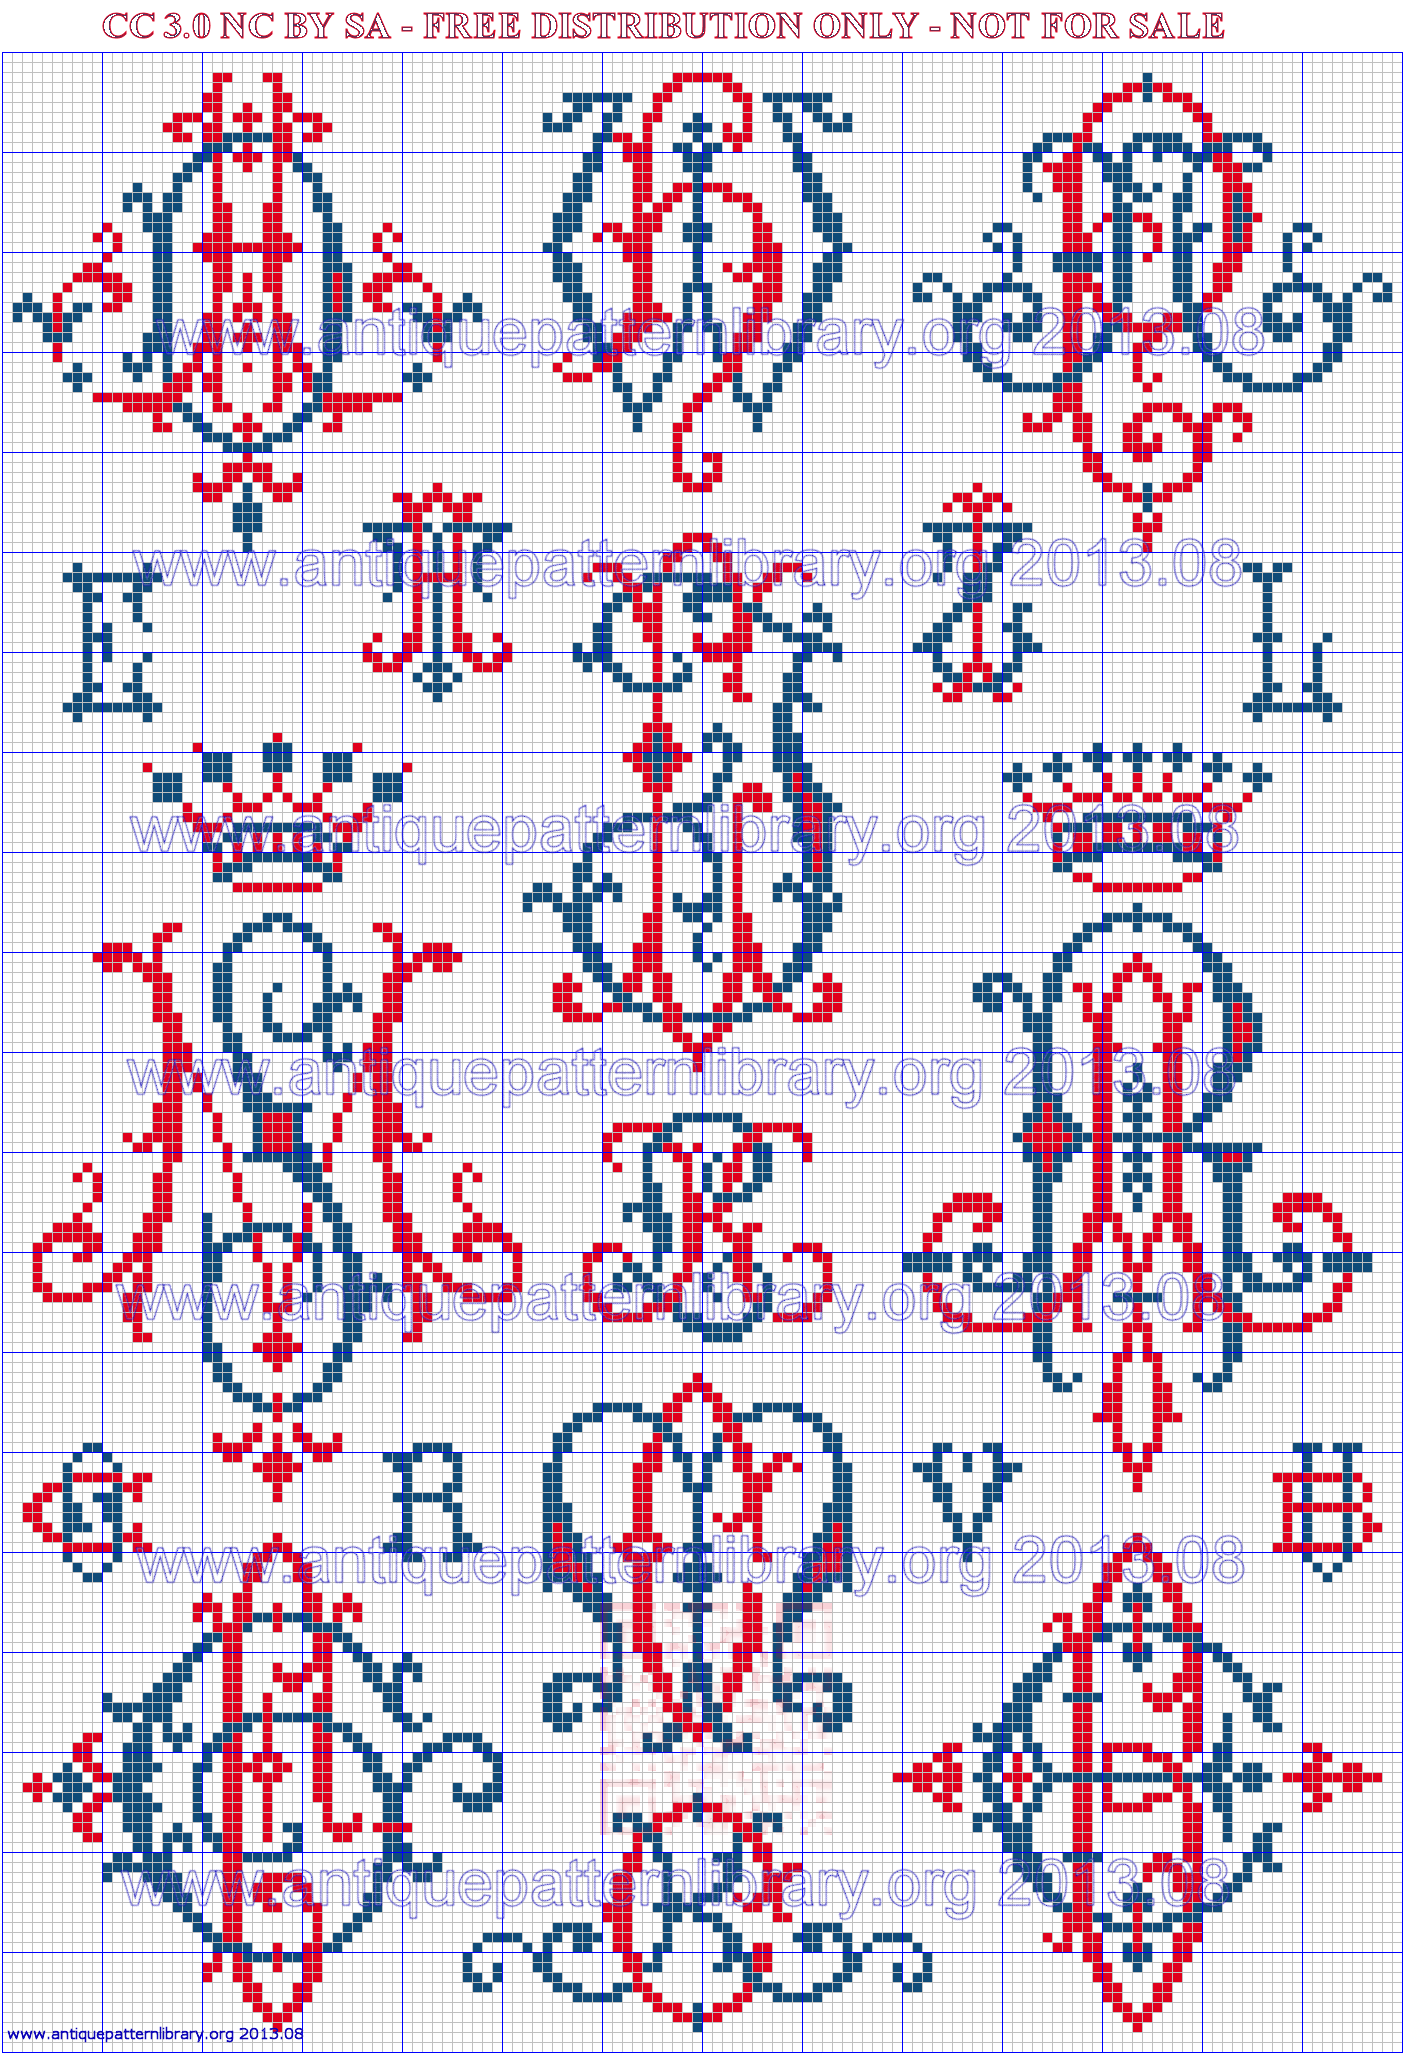 back cover, various monograms from previous pages